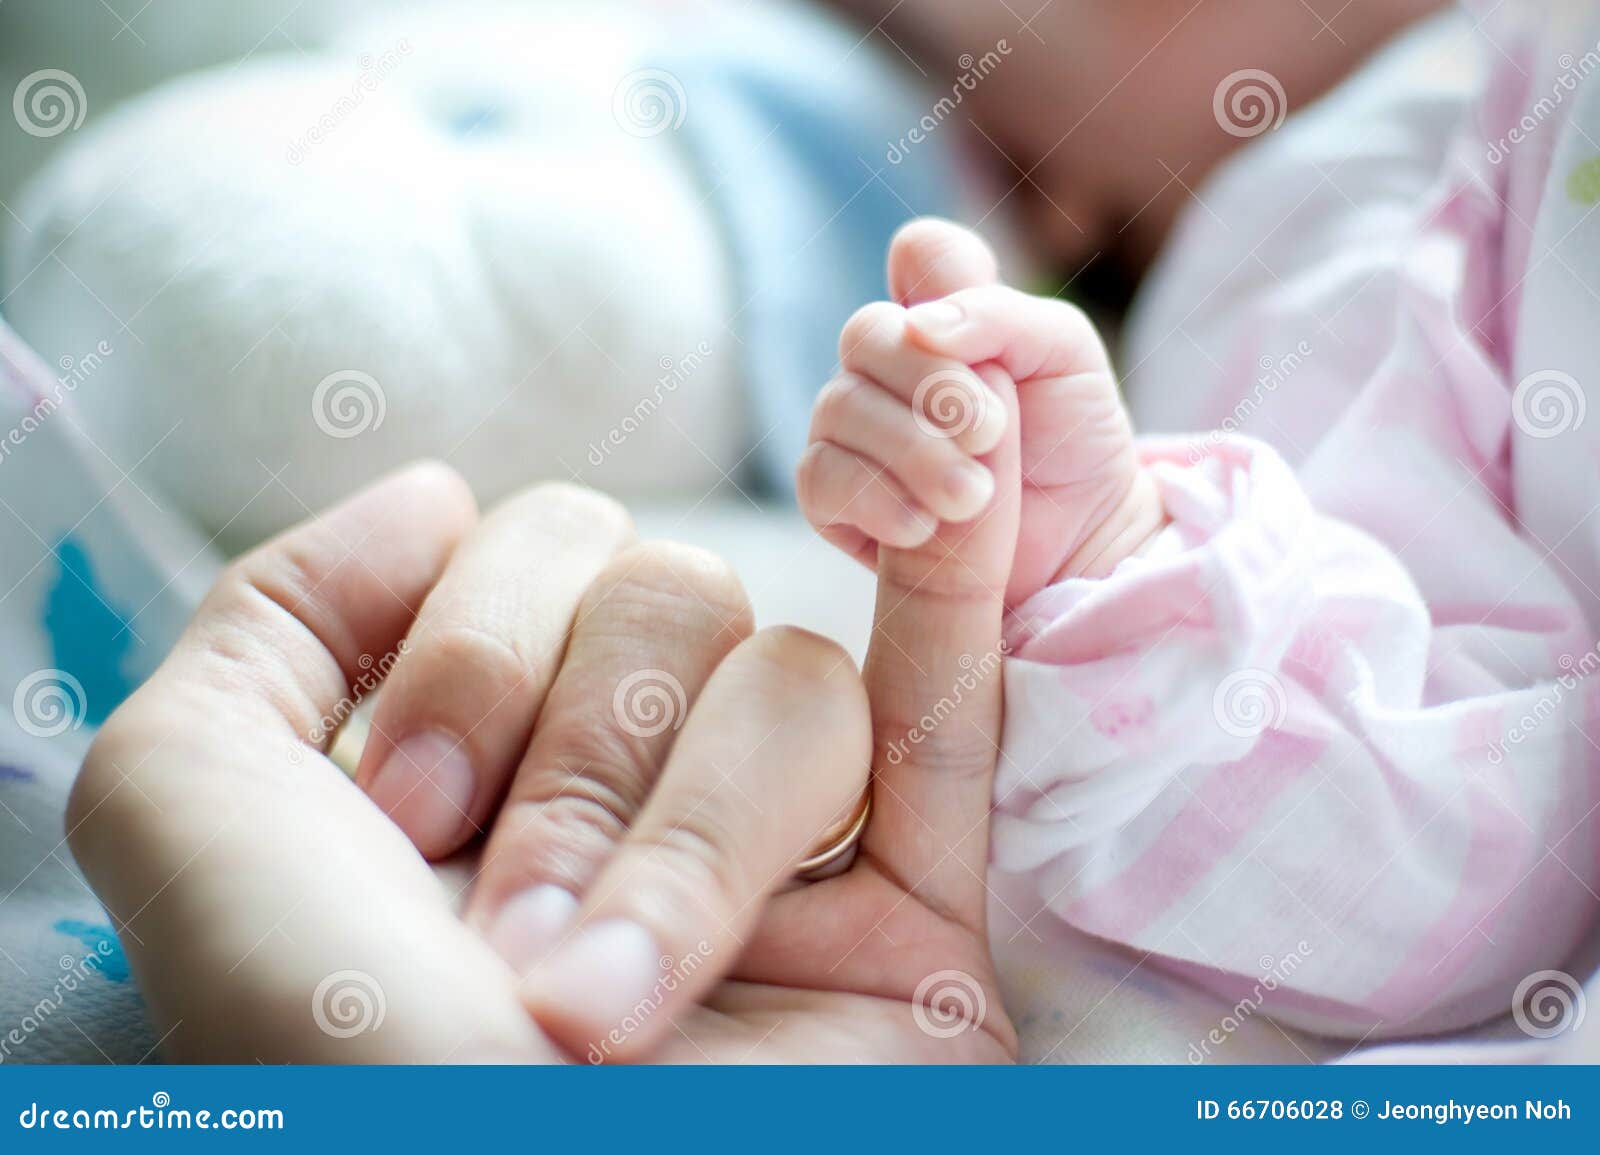 mother hand holding the baby. photo taken in the neonatal gynecological